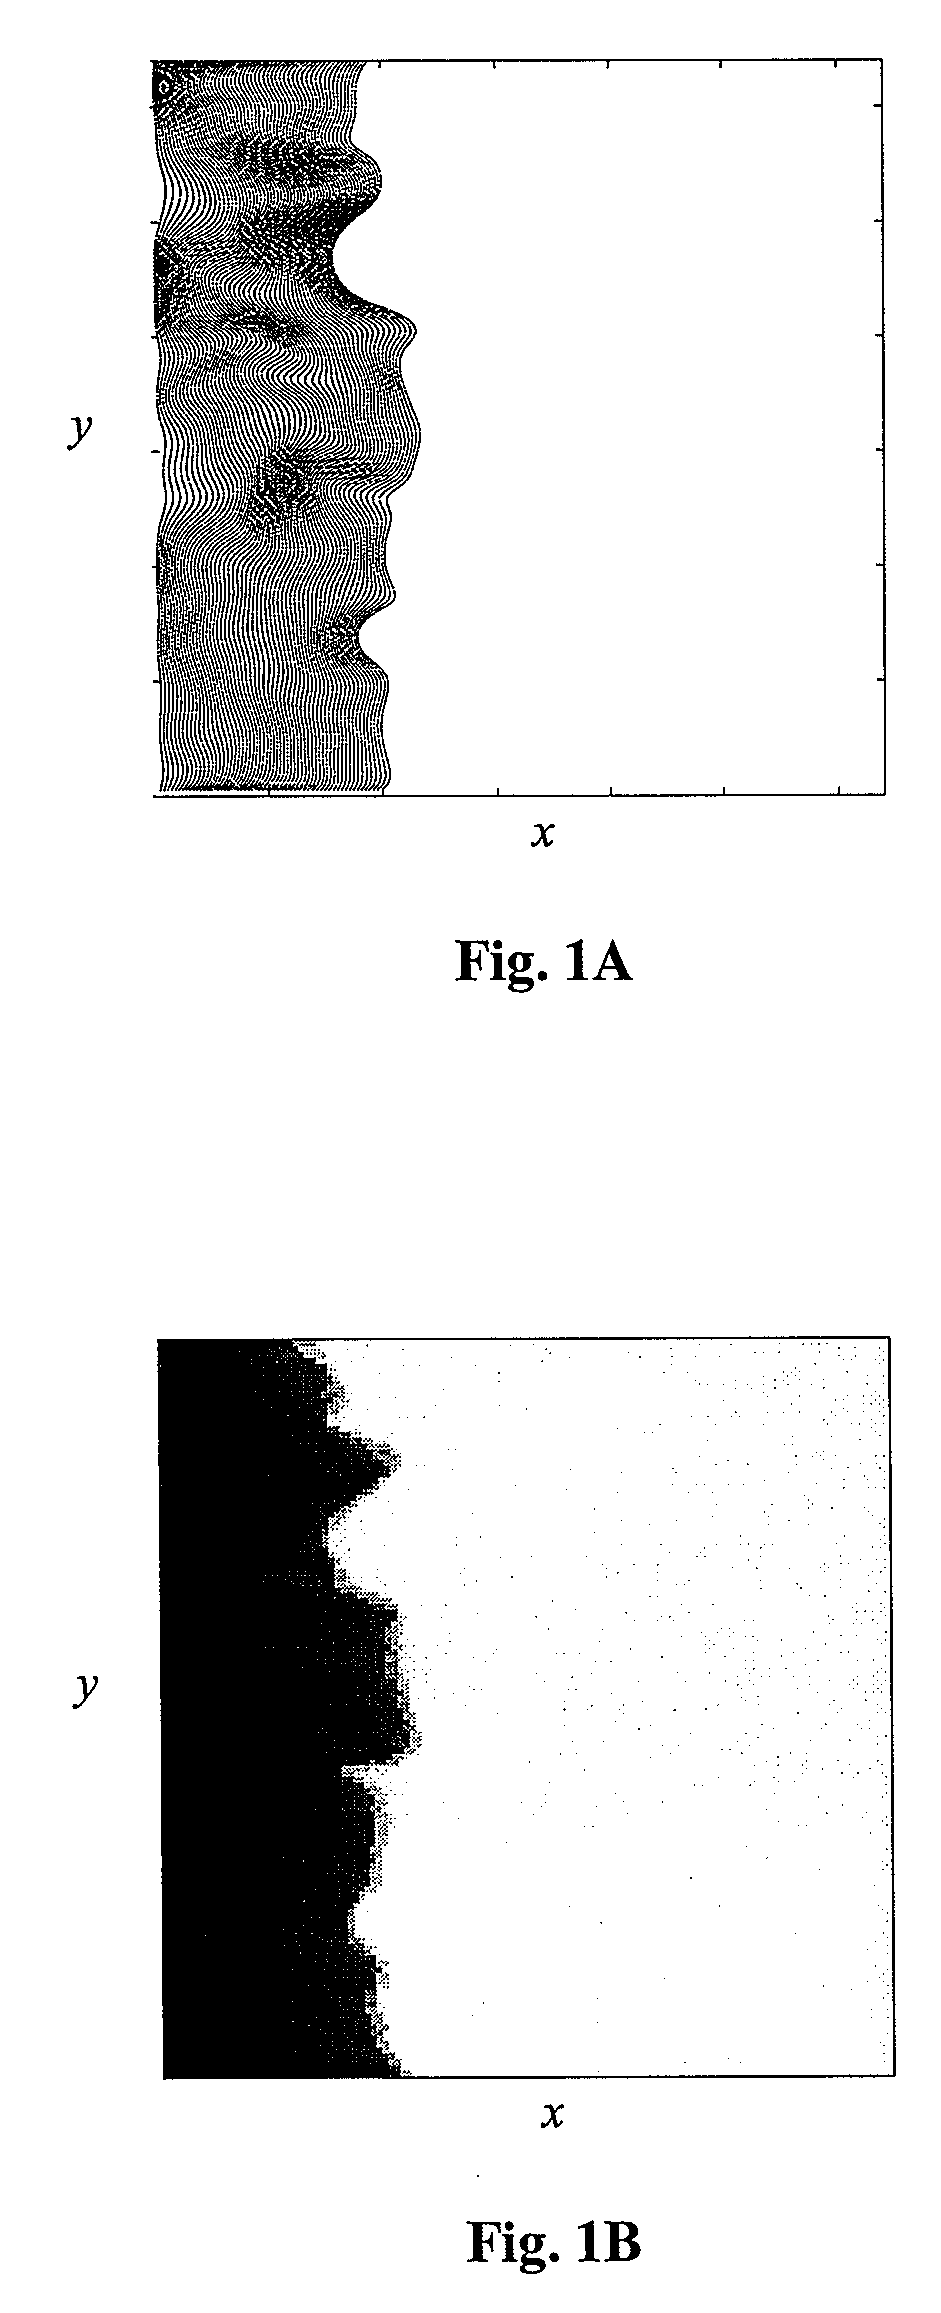 Method of optimizing enhanced recovery of a fluid in place in a porous medium by front tracking